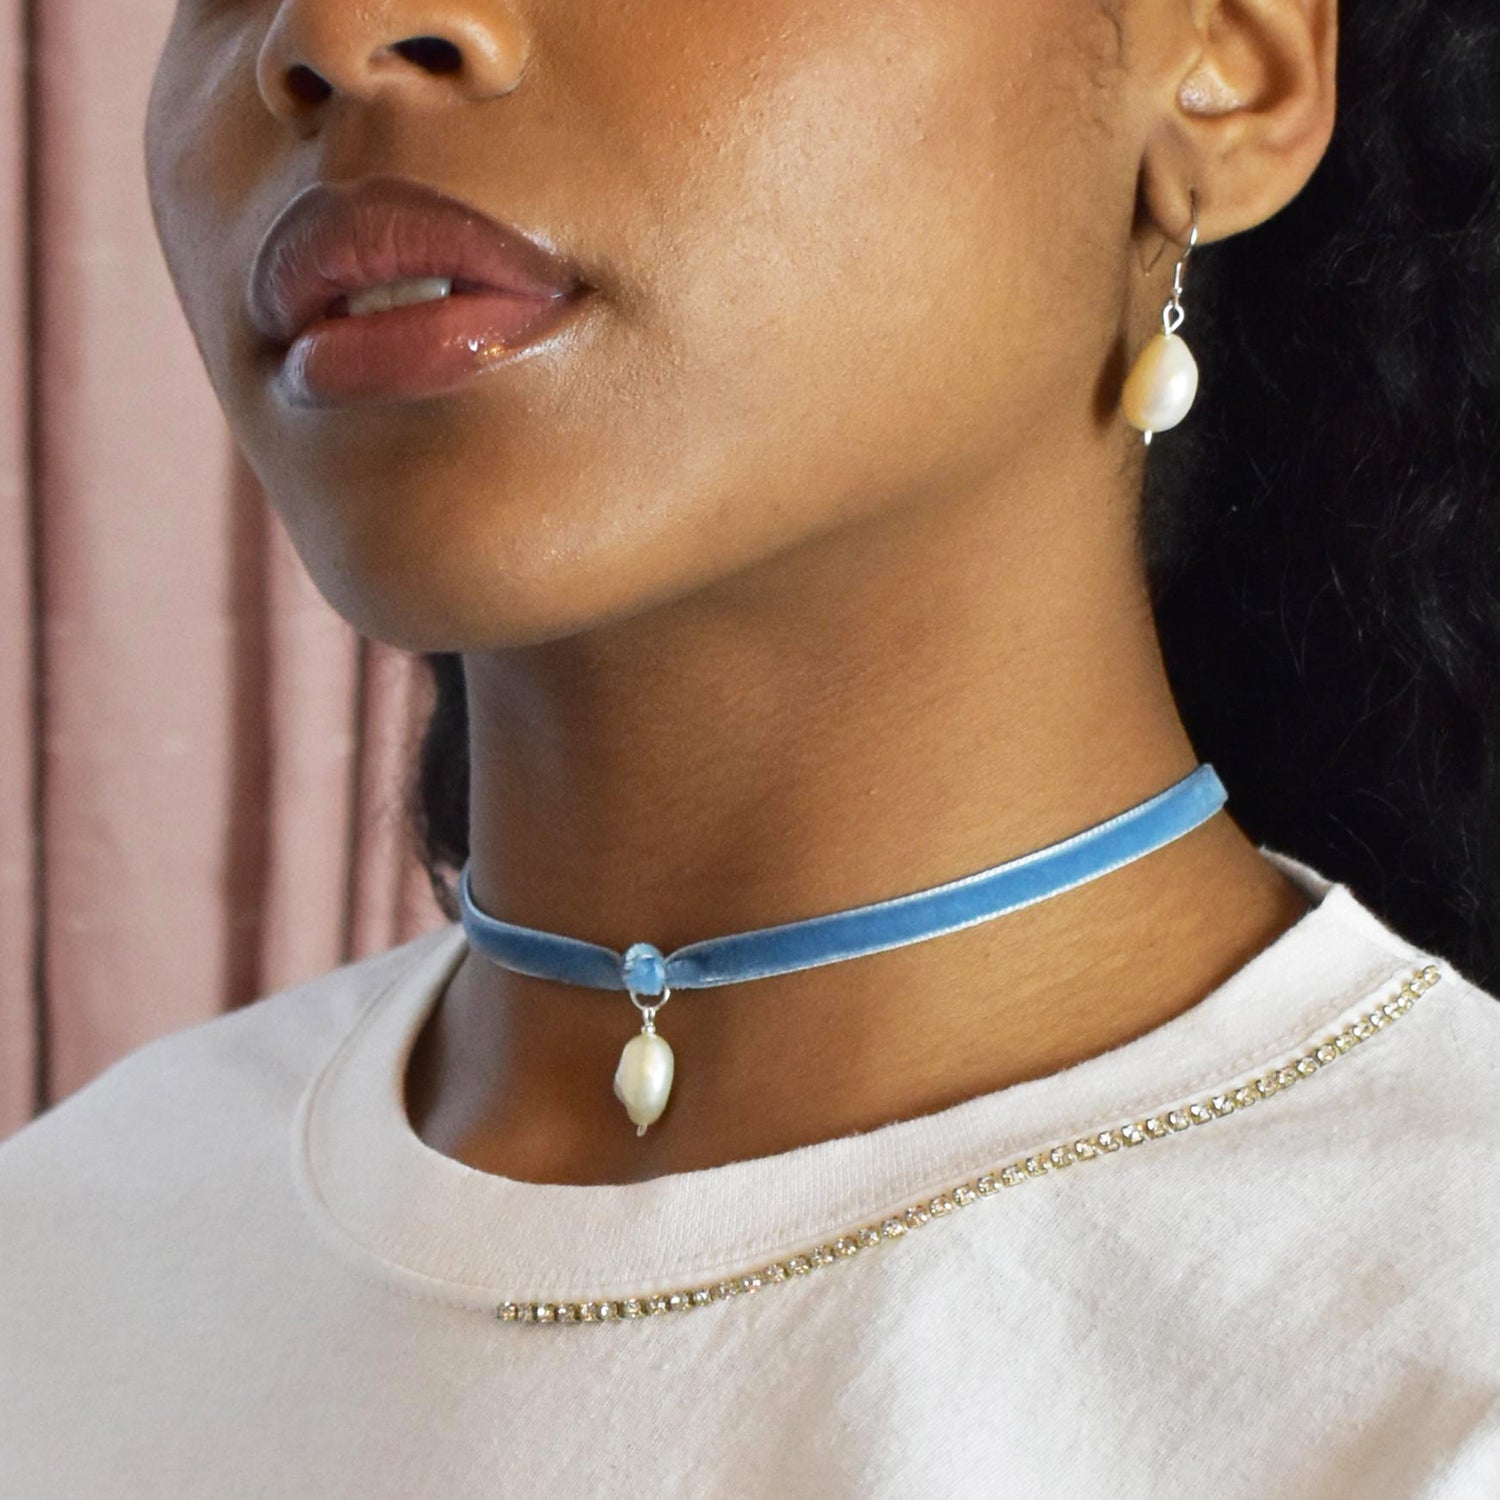 No Wallflower Project velvet and baroque freshwater pearl choker necklace